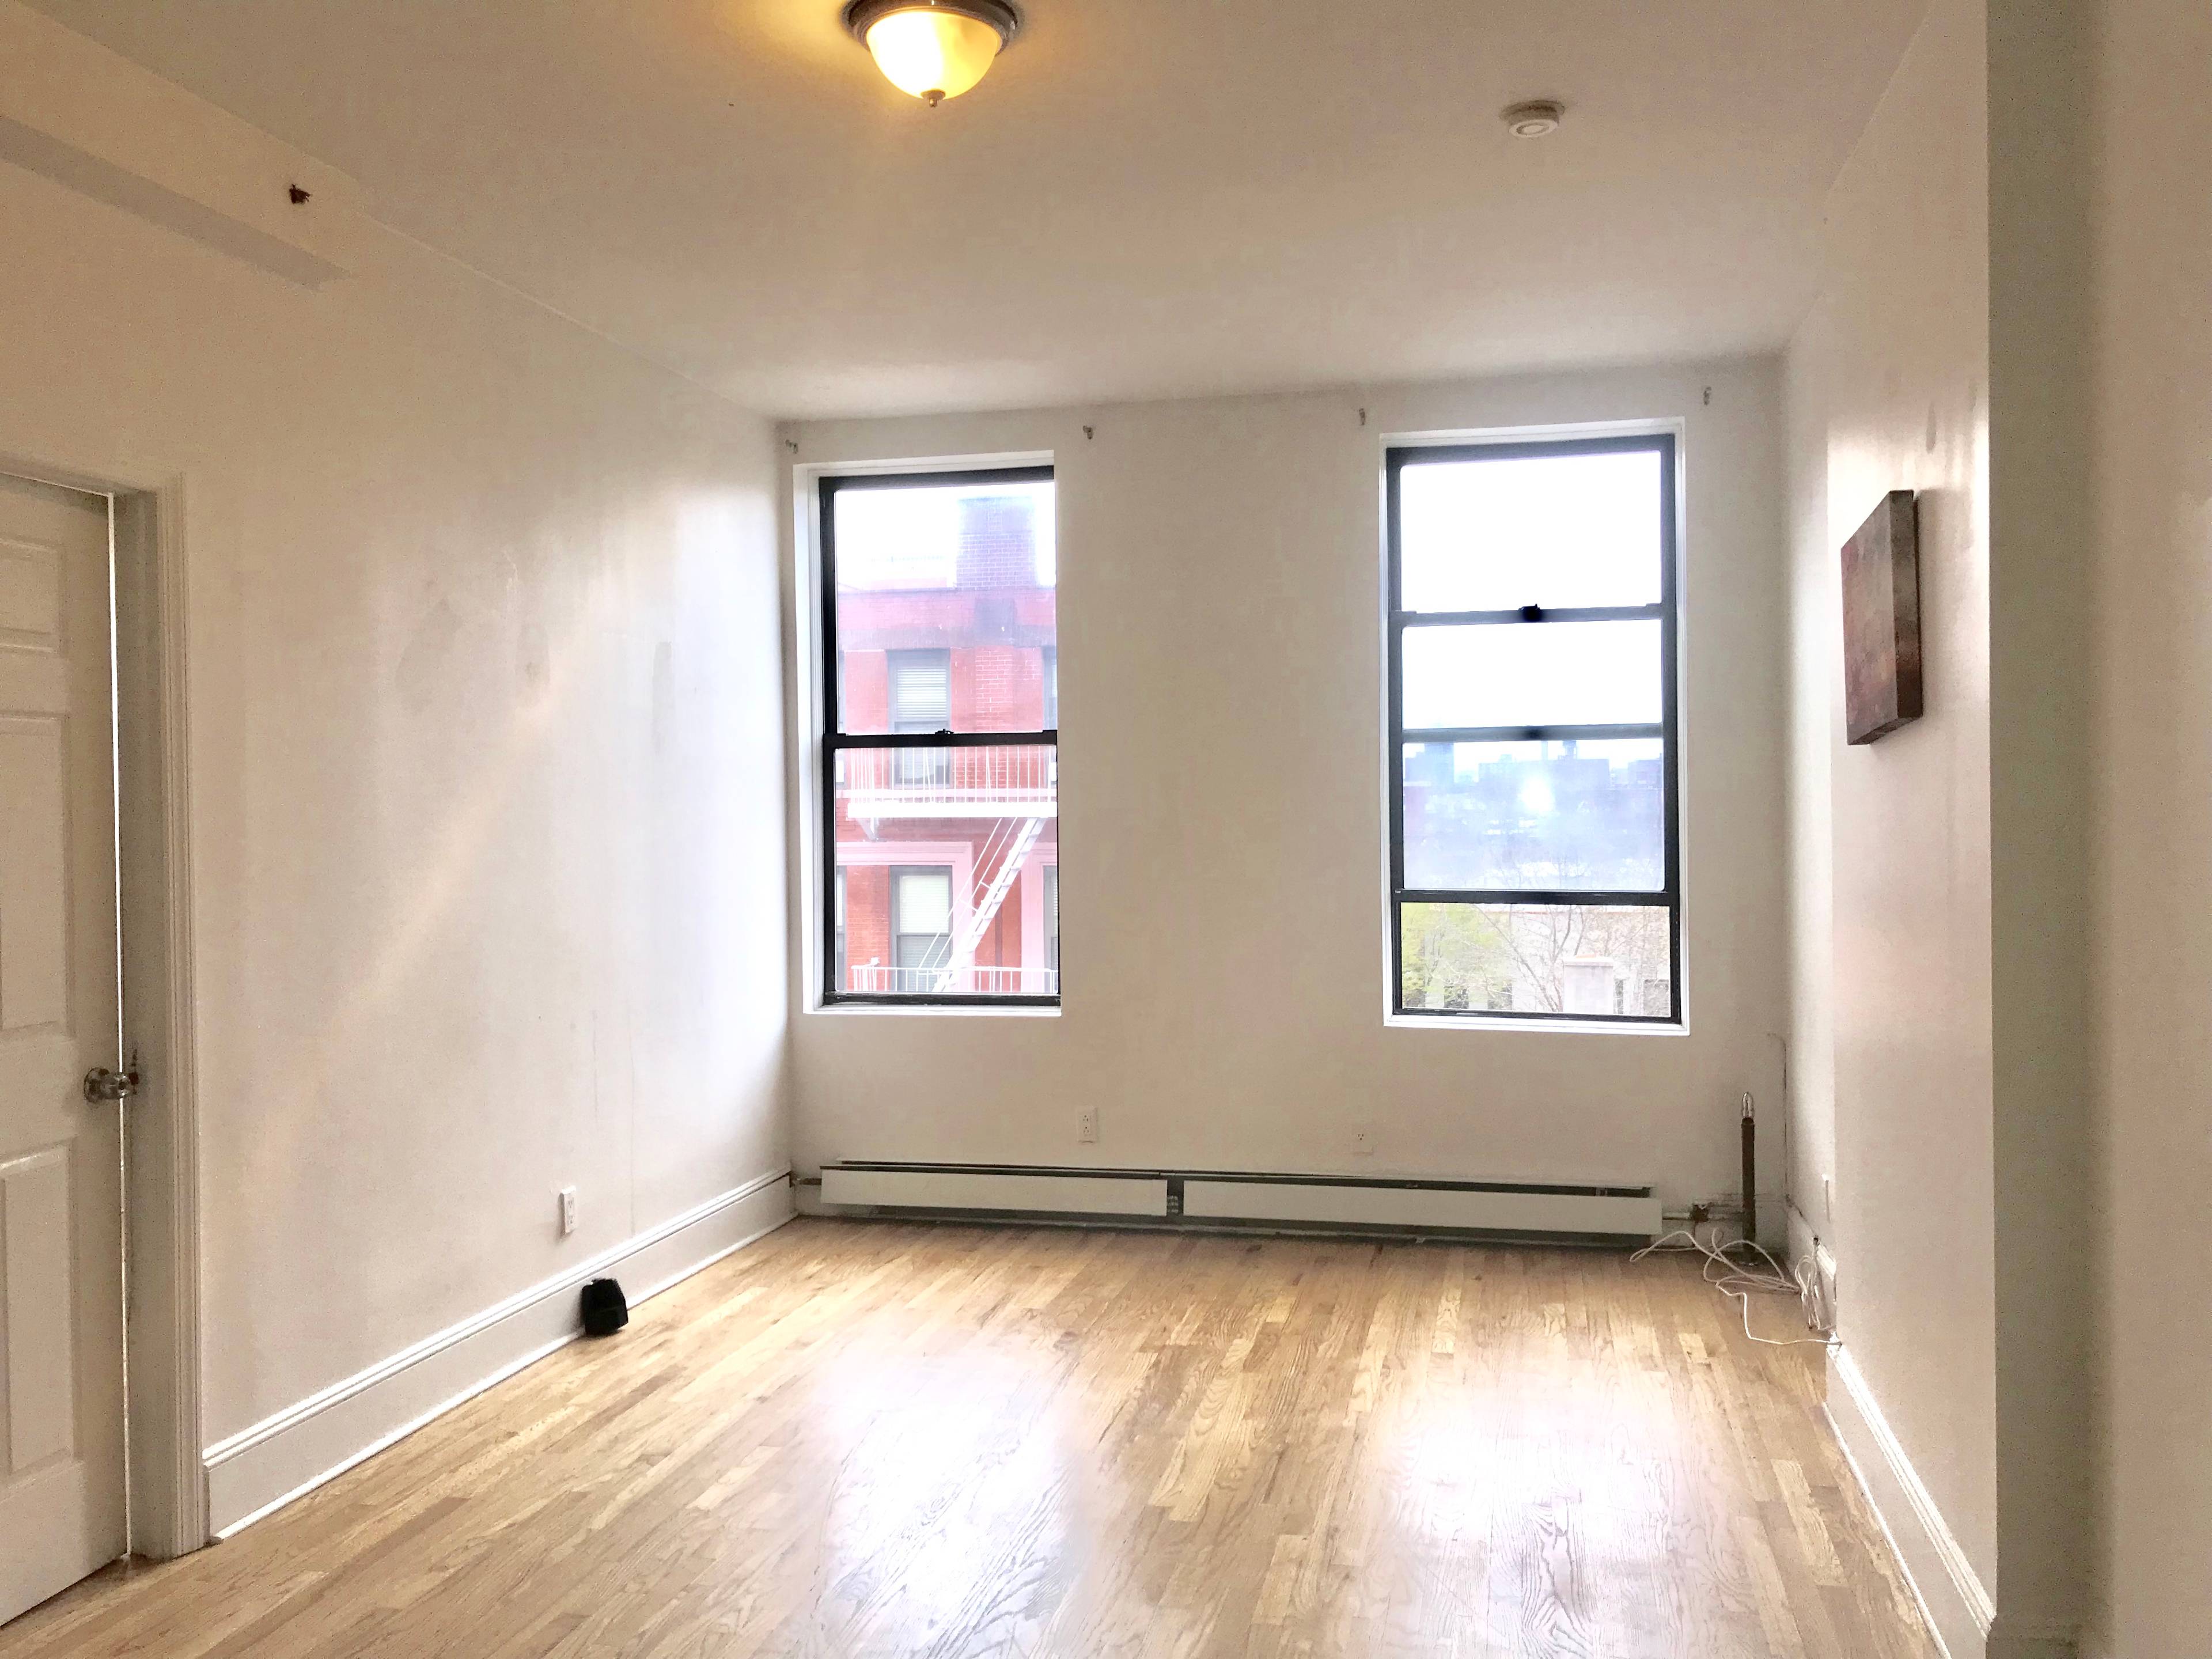 East Harlem Huge One Bedroom Apartment Steps Away From  The 6 Train 10 Minute Commute To Midtown/Downtown